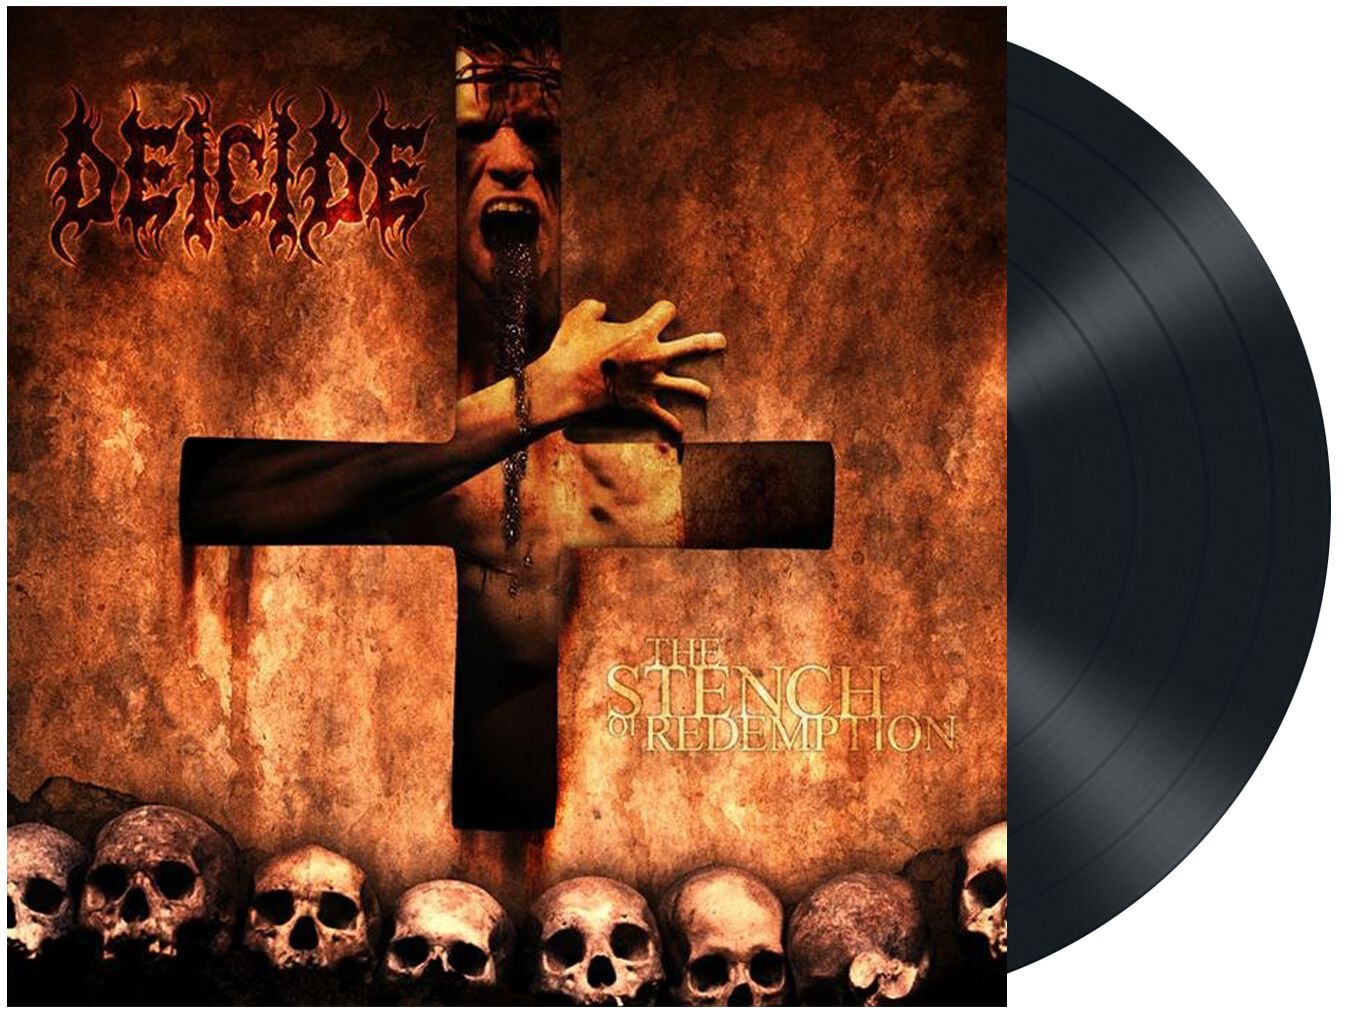 Image of Deicide The stench of redemption LP Standard